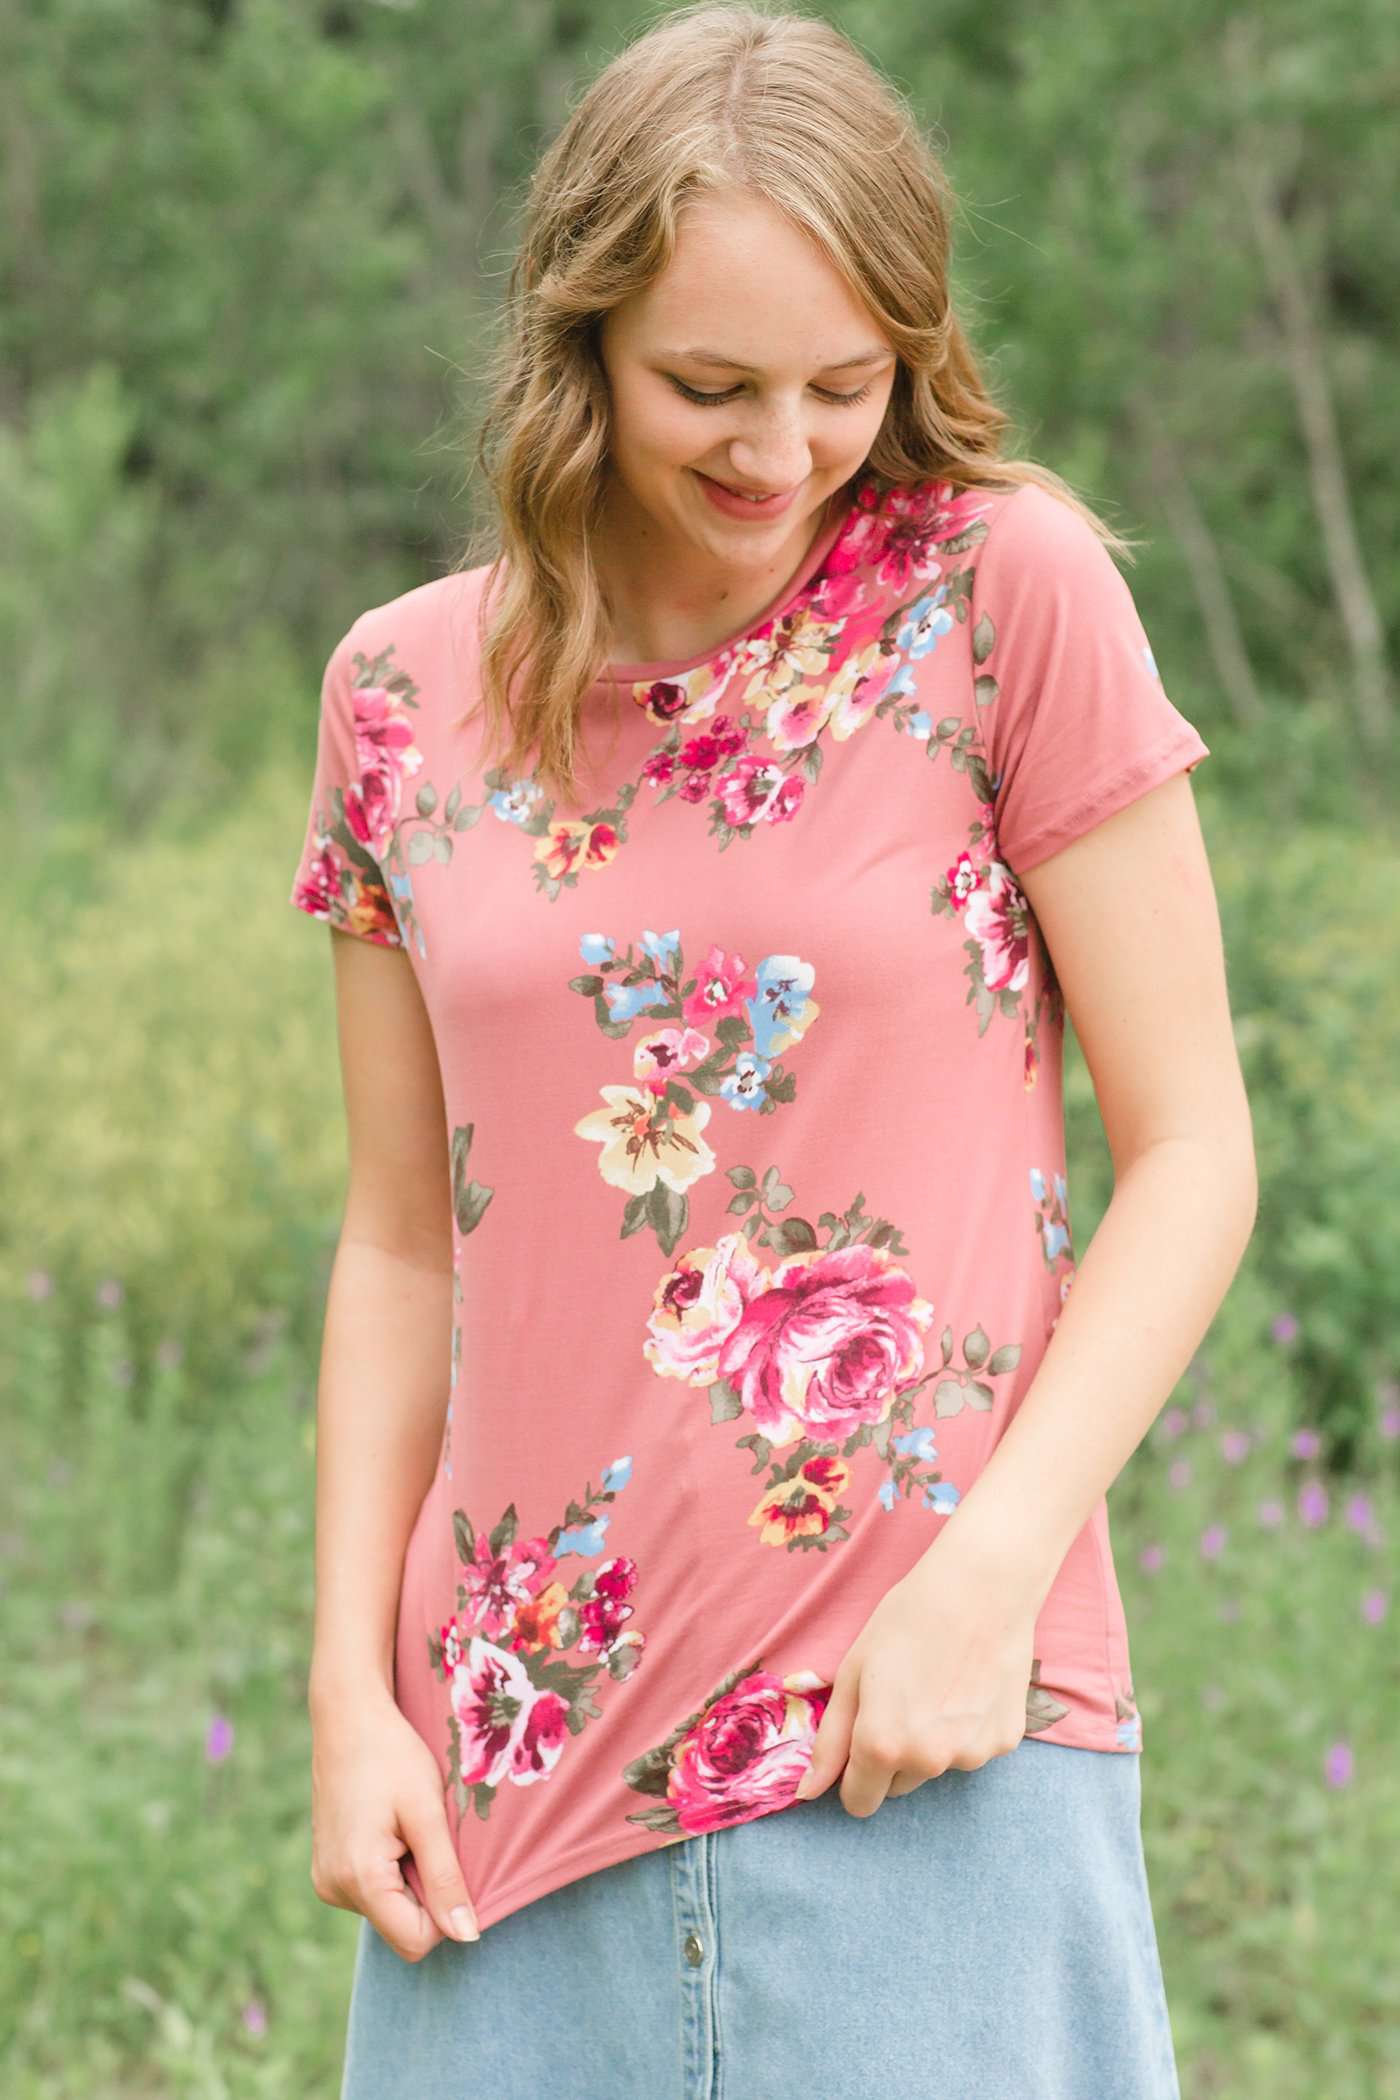 Blush, Ivory, Navy or Mauve Floral print options in this modest short sleeve tee.